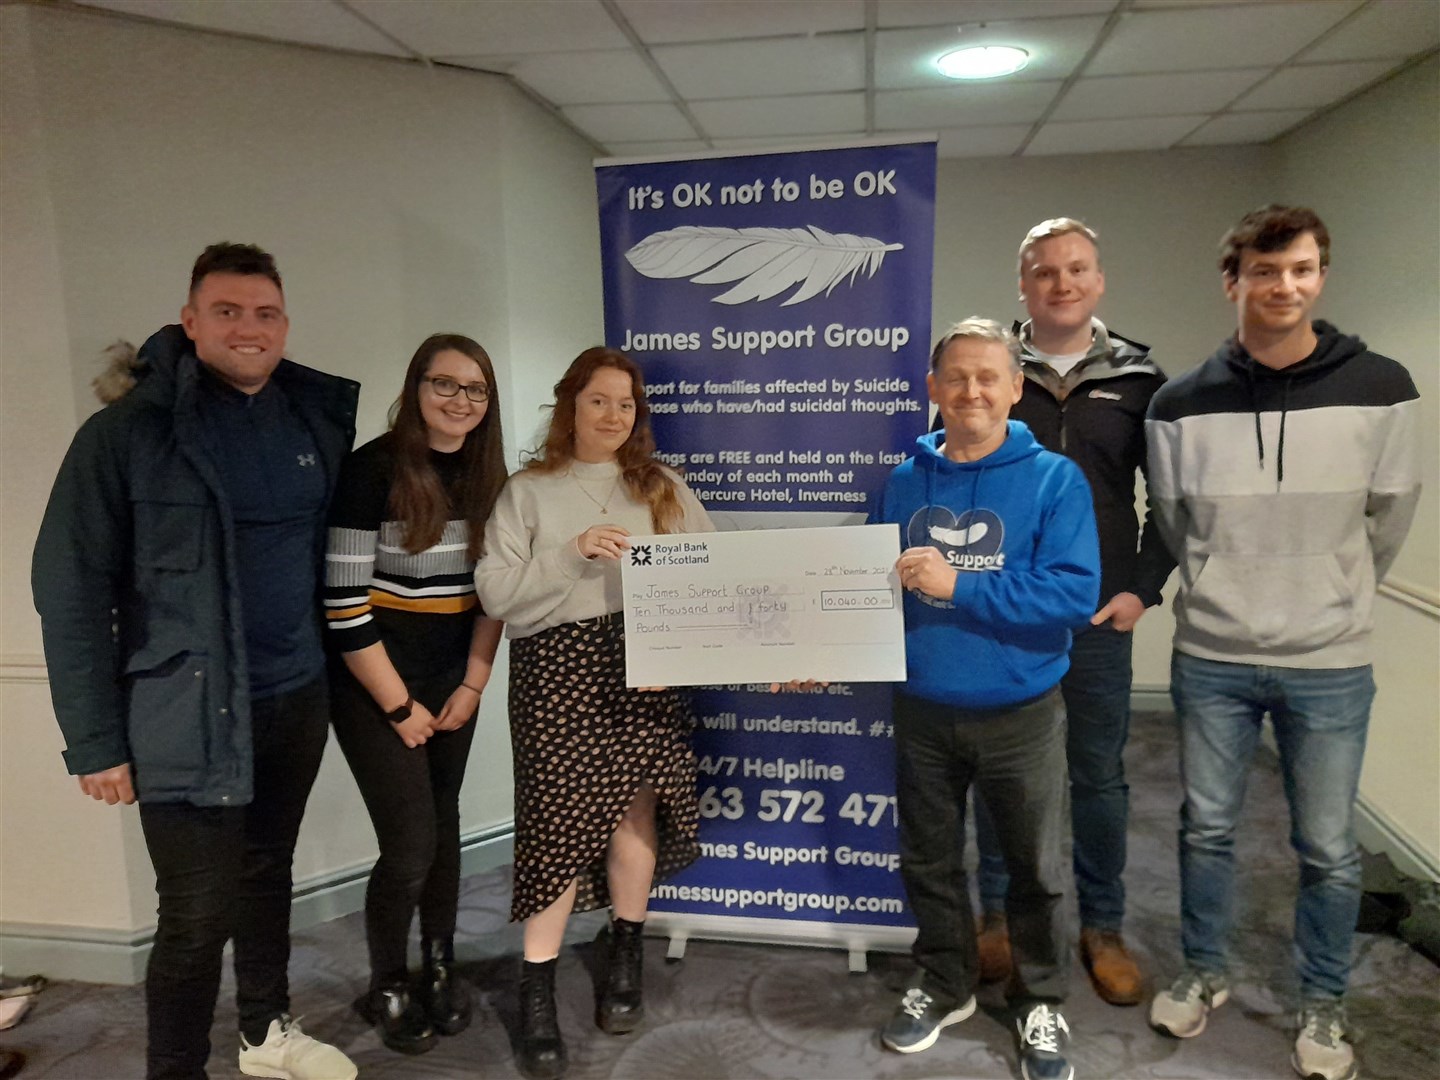 A sponsored walk has raised more than £10,000 for the James Support Group. From left, Liam Macleod, Gillian Mackenzie, Hollie Morris, Patrick Mullery, Seamus Trimble and Scott Fraser.